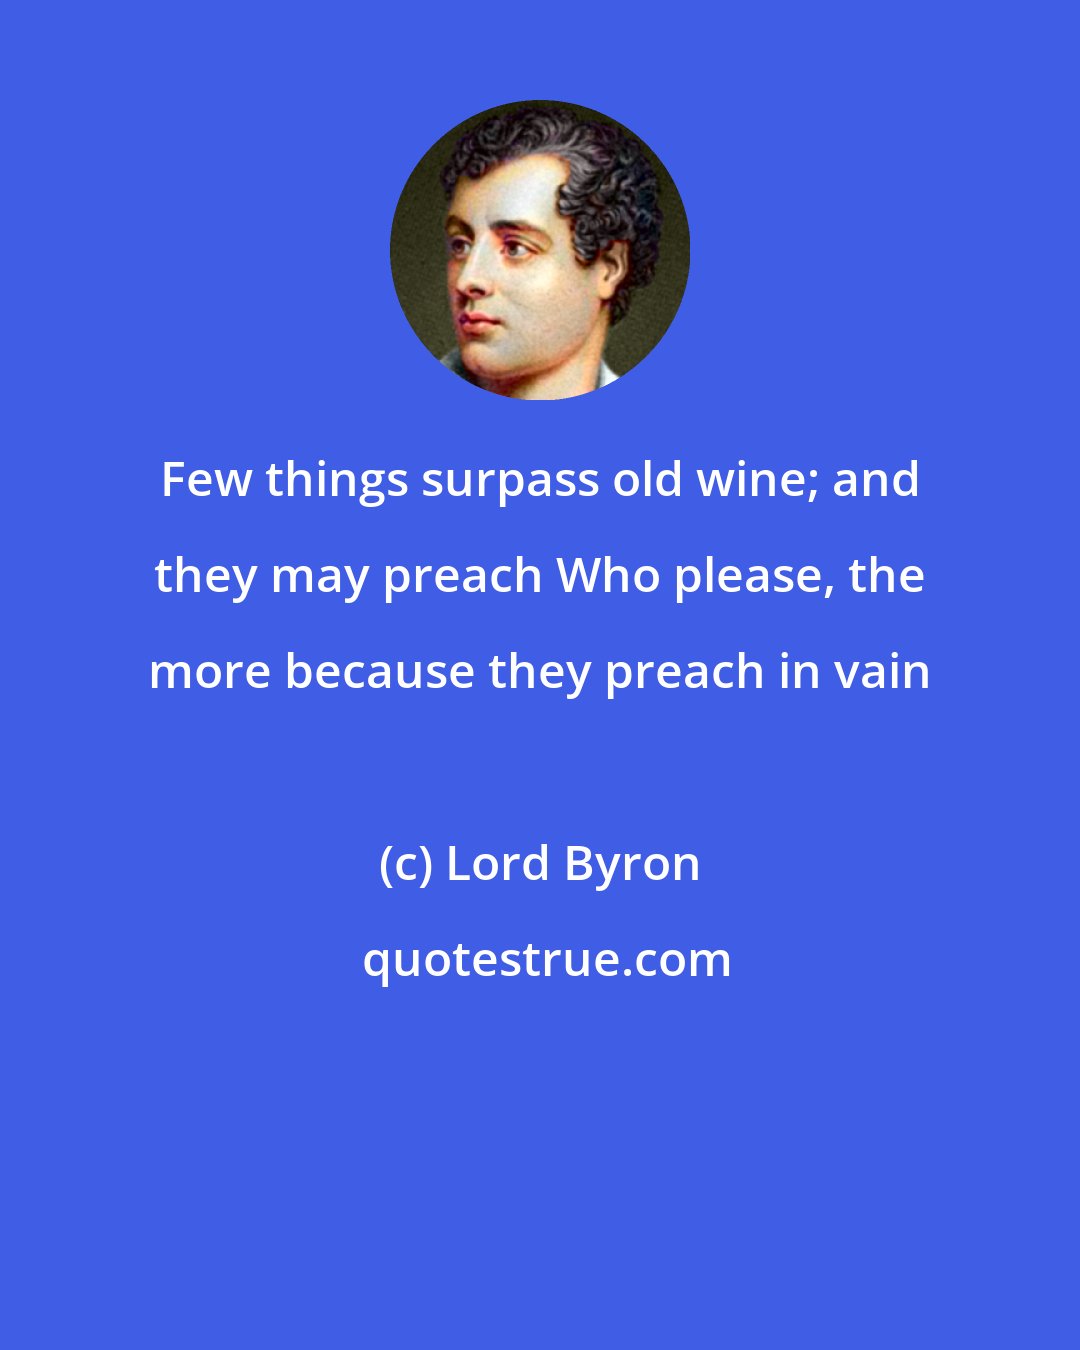 Lord Byron: Few things surpass old wine; and they may preach Who please, the more because they preach in vain